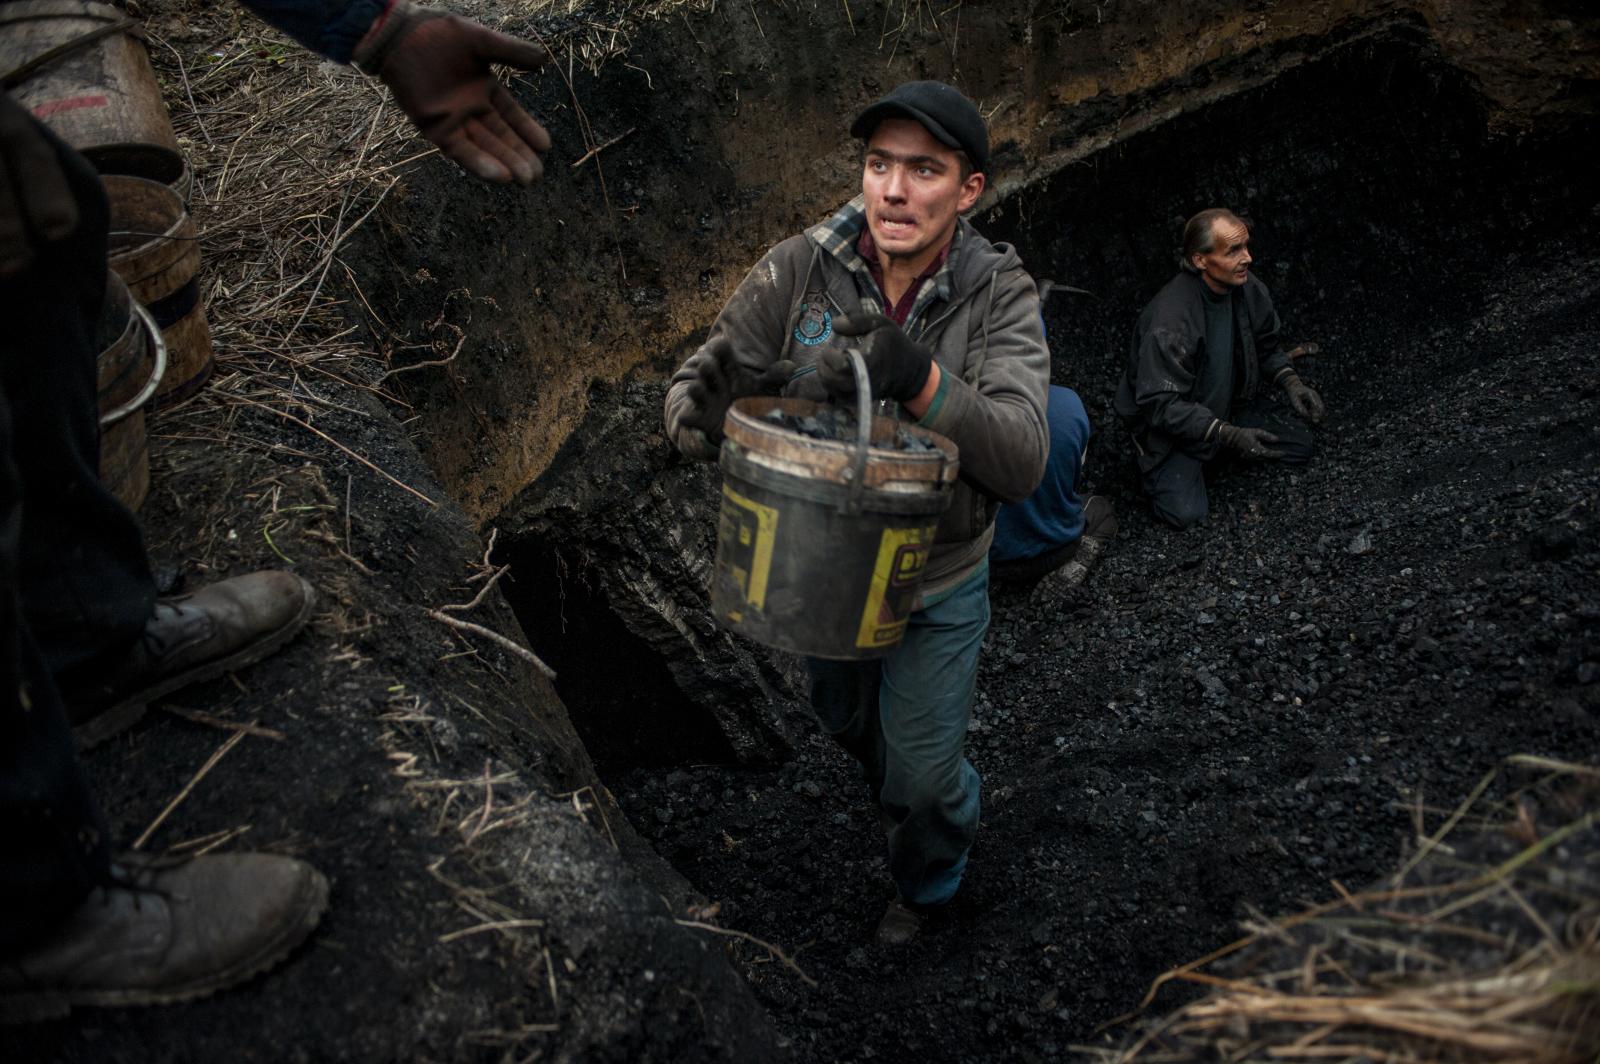 A group of men mine coal in Wał... and dangerous work conditions.